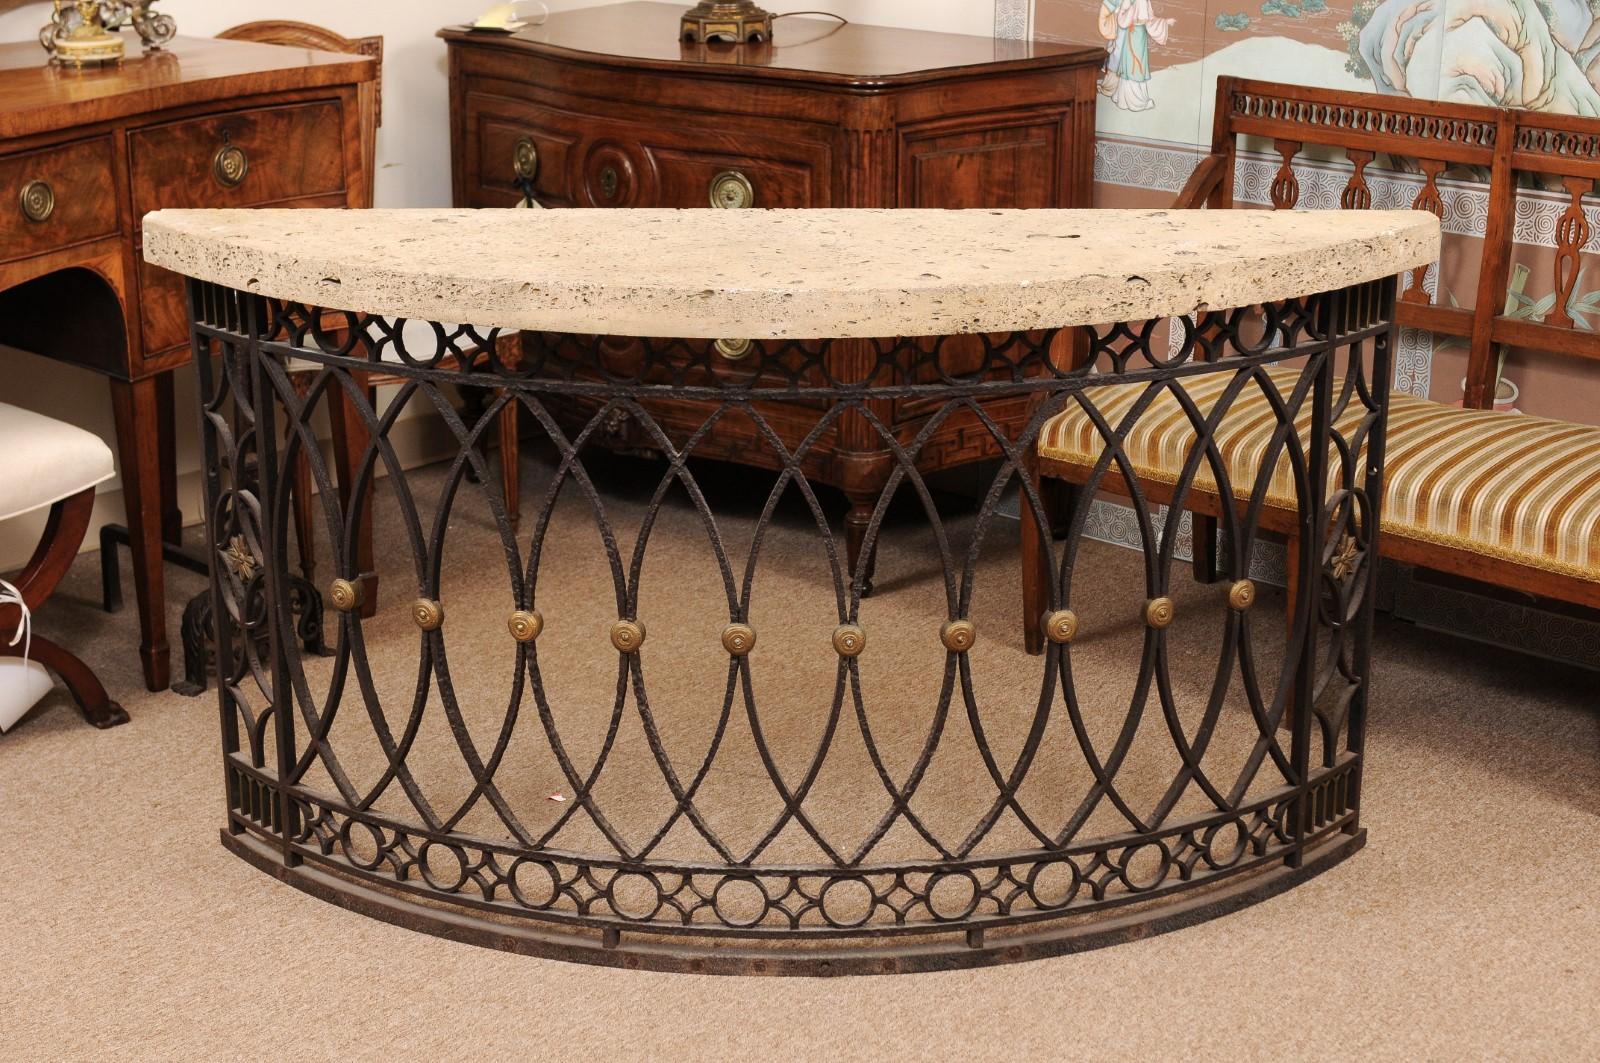 The demilune console table with fossilized stone top above a wrought iron base with interlaced/geometric design and gilt accents.